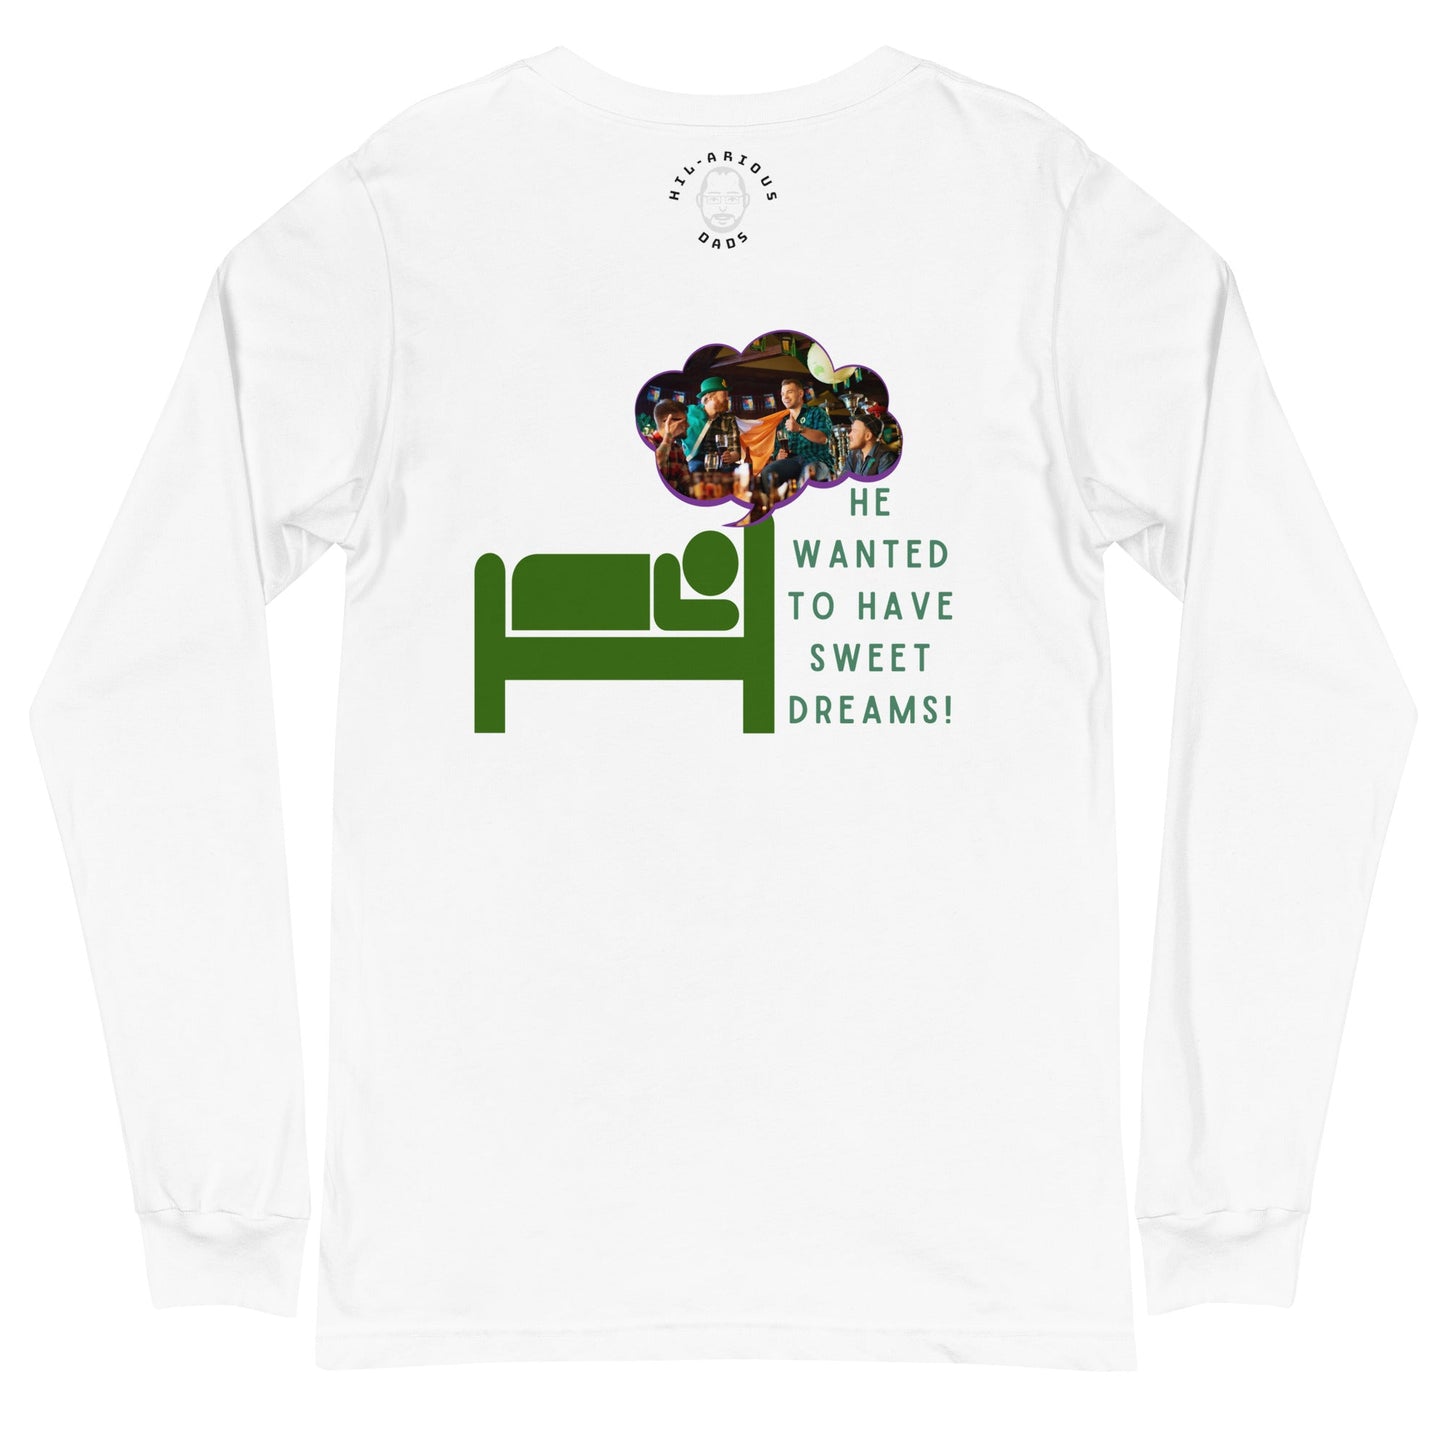 Why did the Irishman put sugar on his pillow?-Long Sleeve Tee - Hil-arious Dads